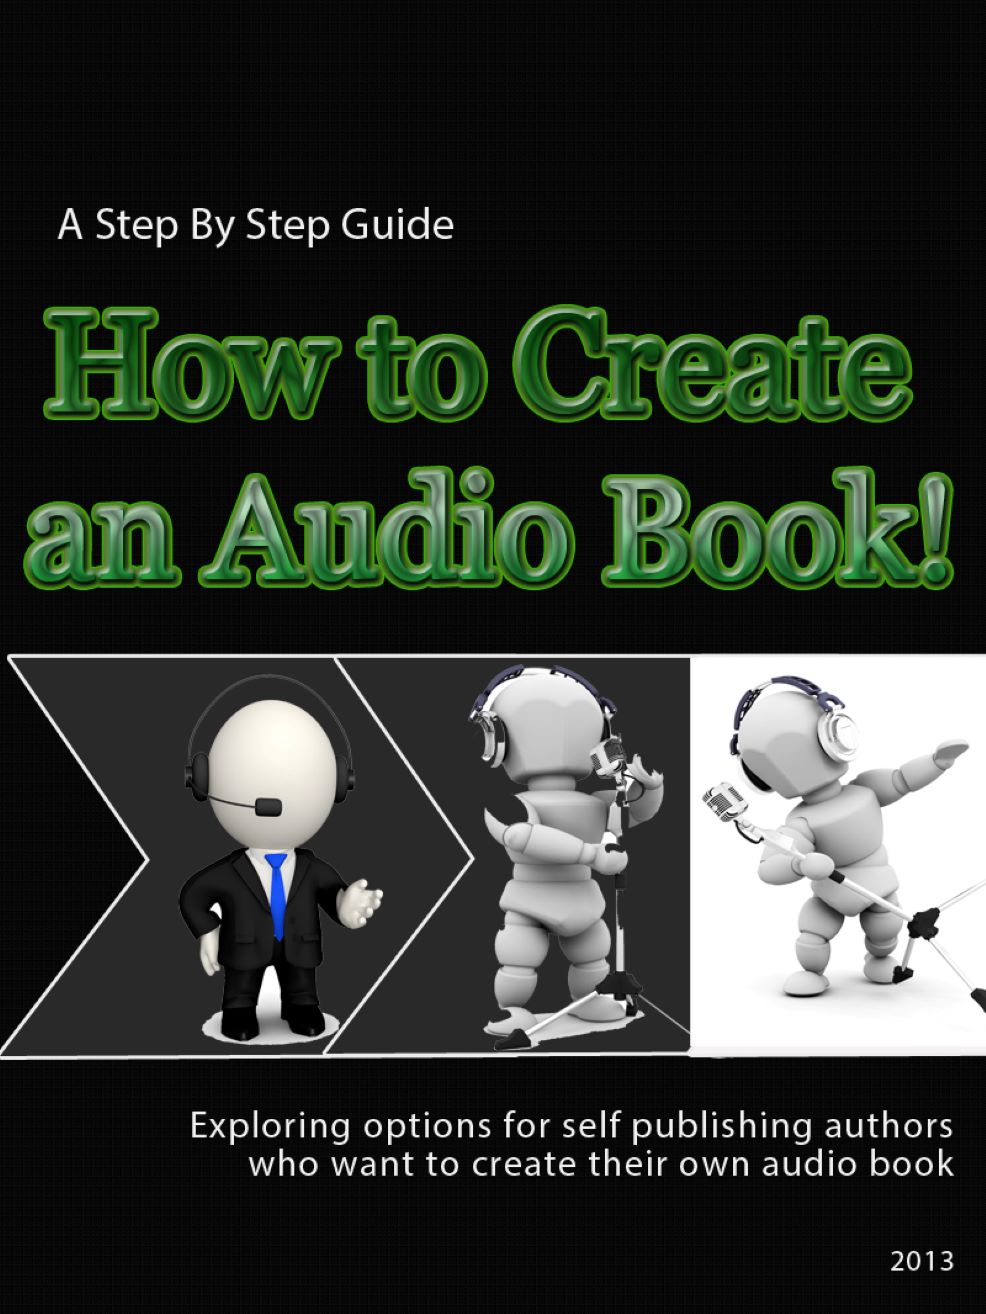 How To Create an Audio Book